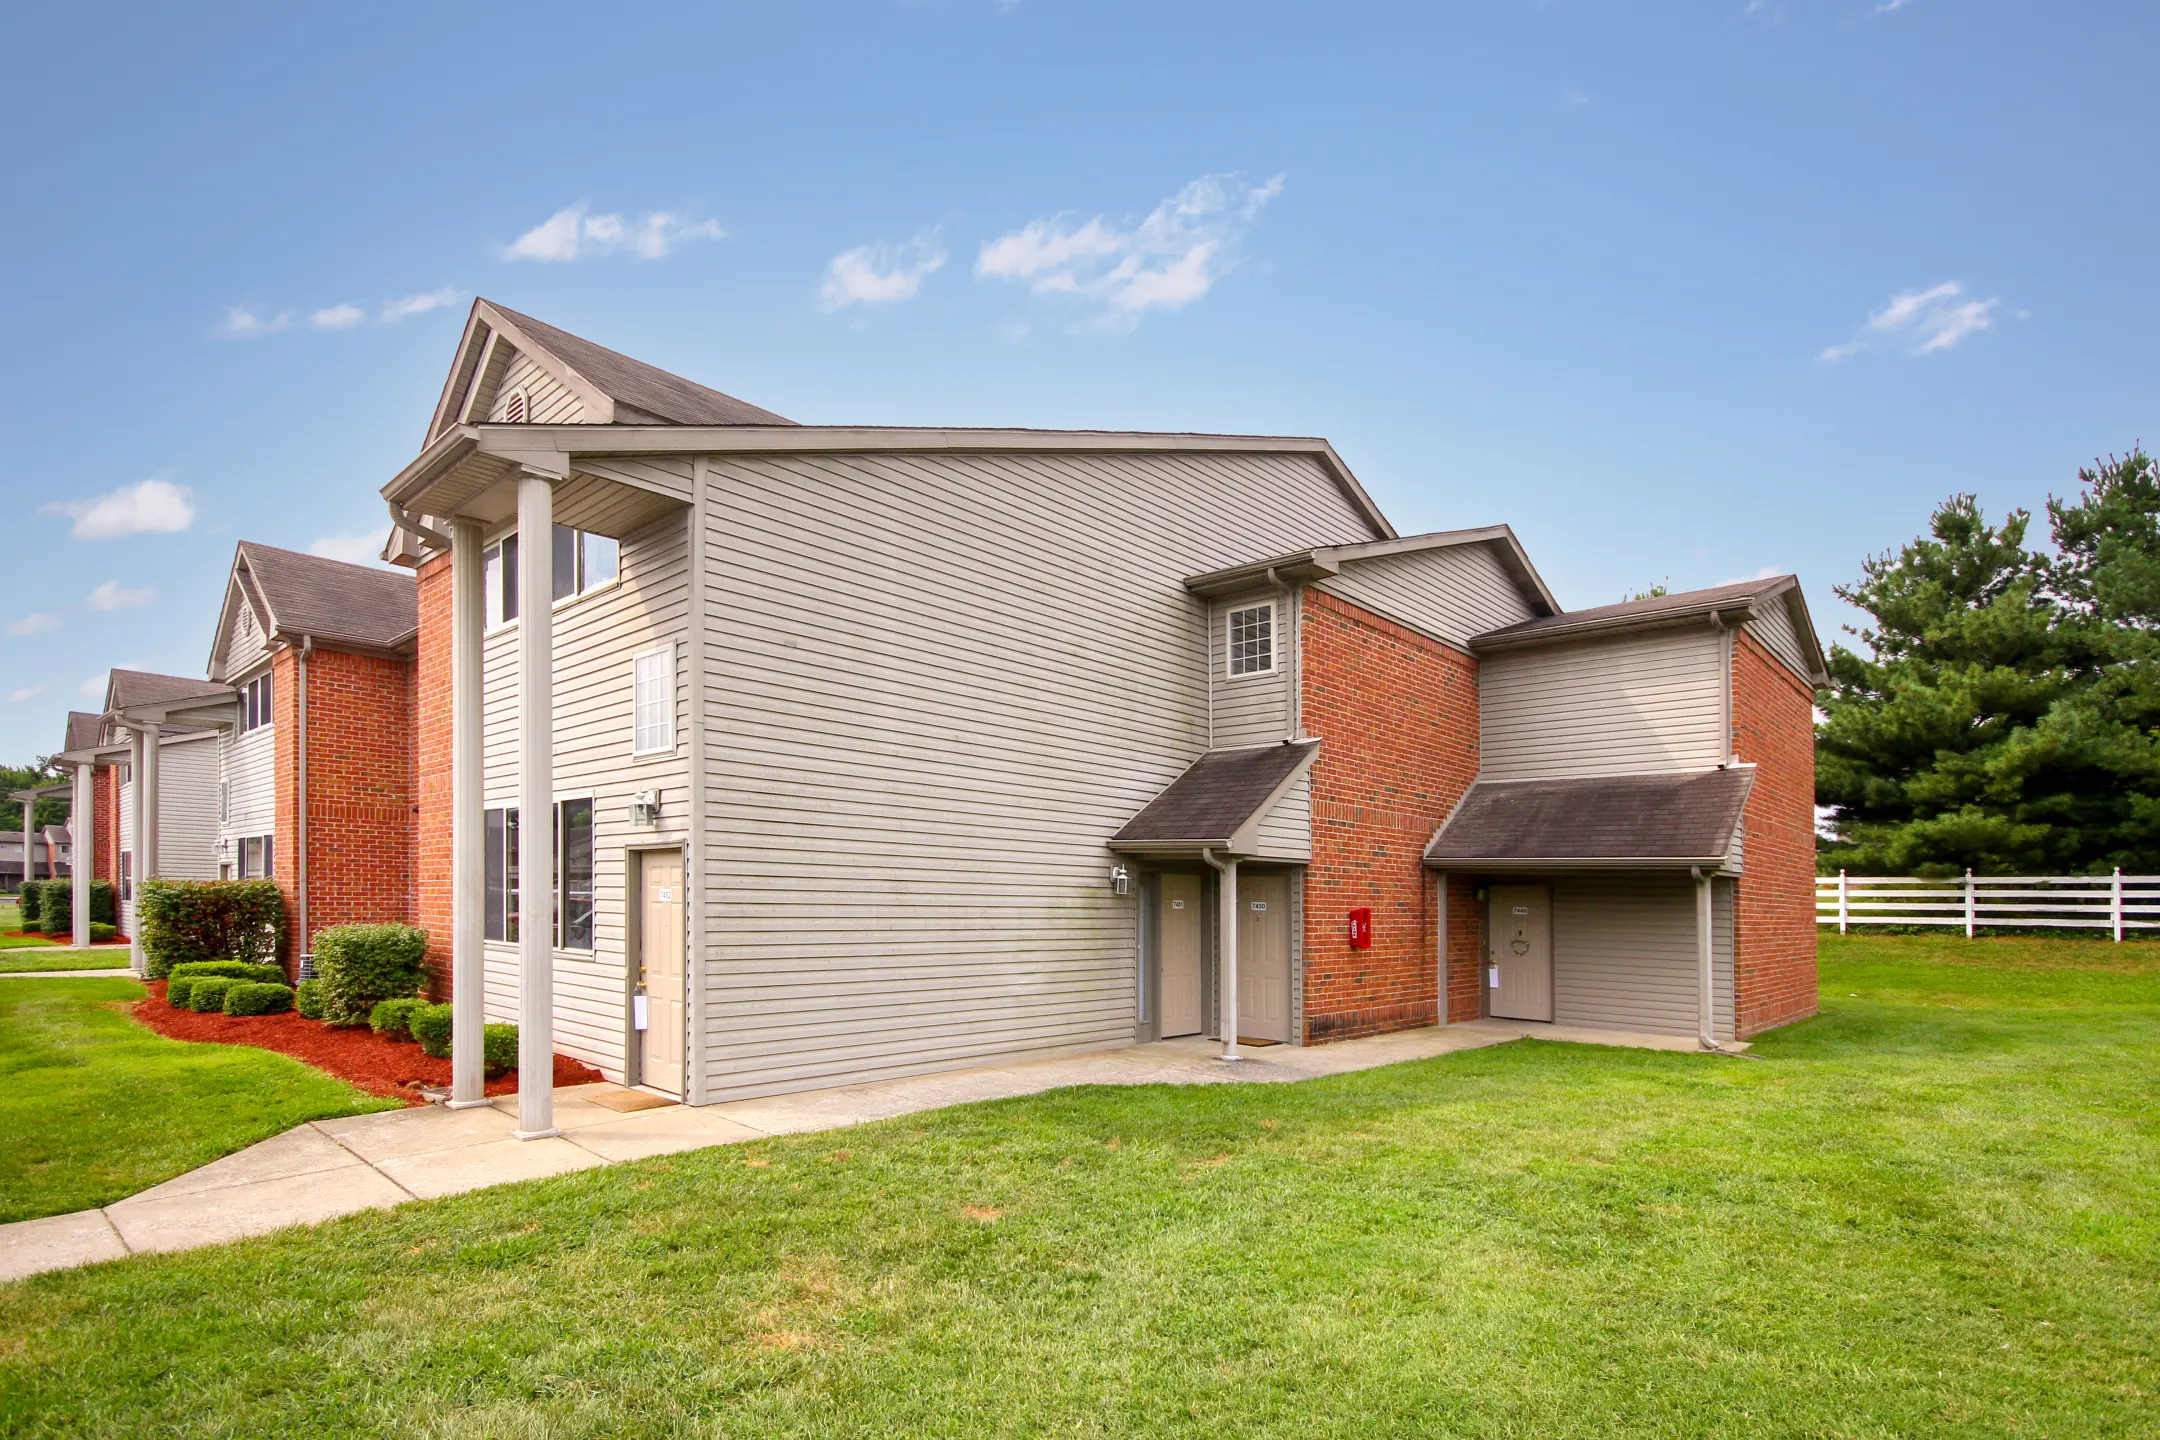 Building - Lakeview Apartments - Sellersburg, IN